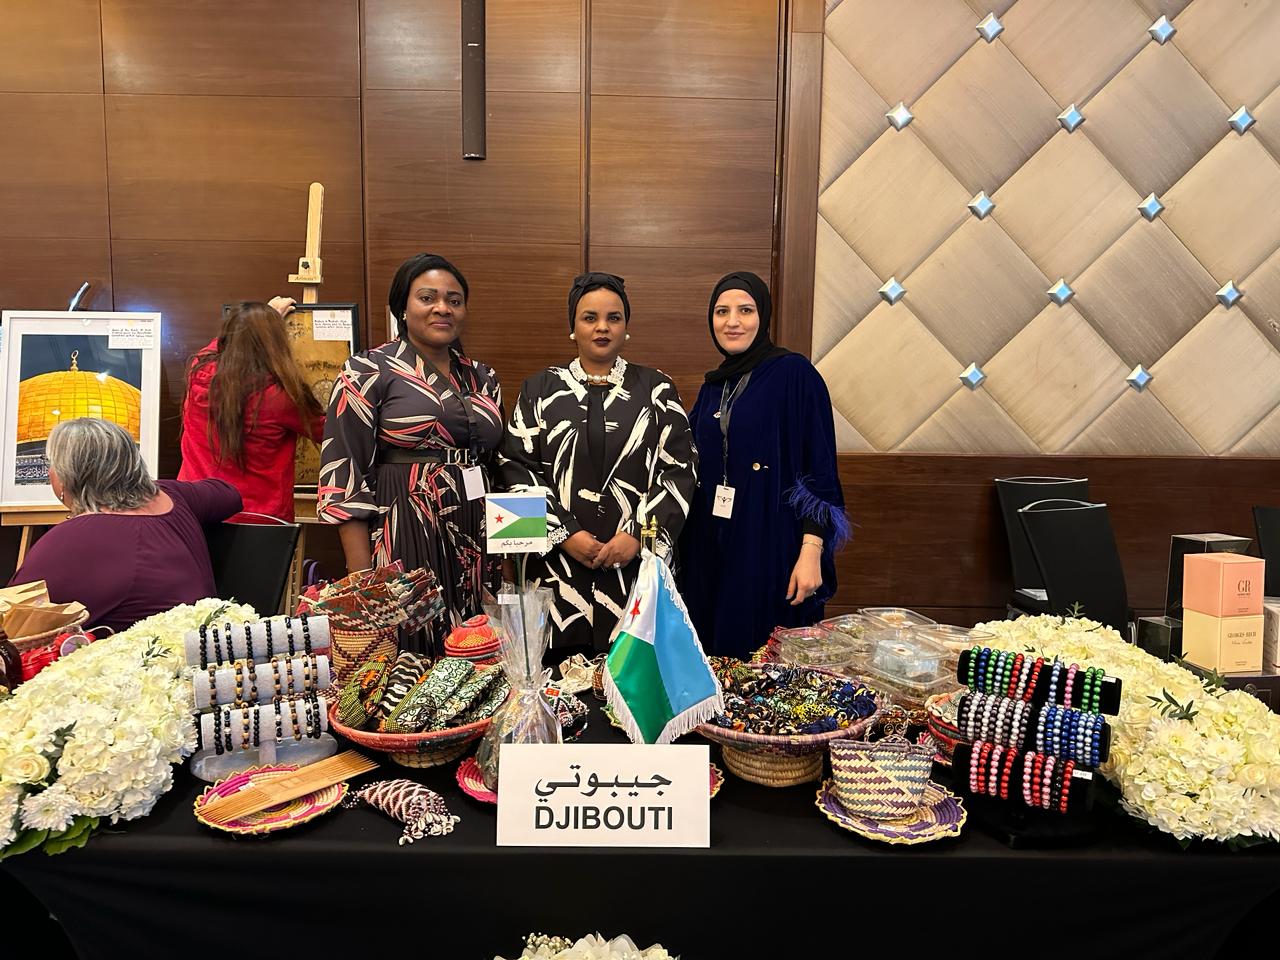 Participation of the Embassy of the Republic of Djibouti in the International Charity Bazaar to benefit the children of GAZA.